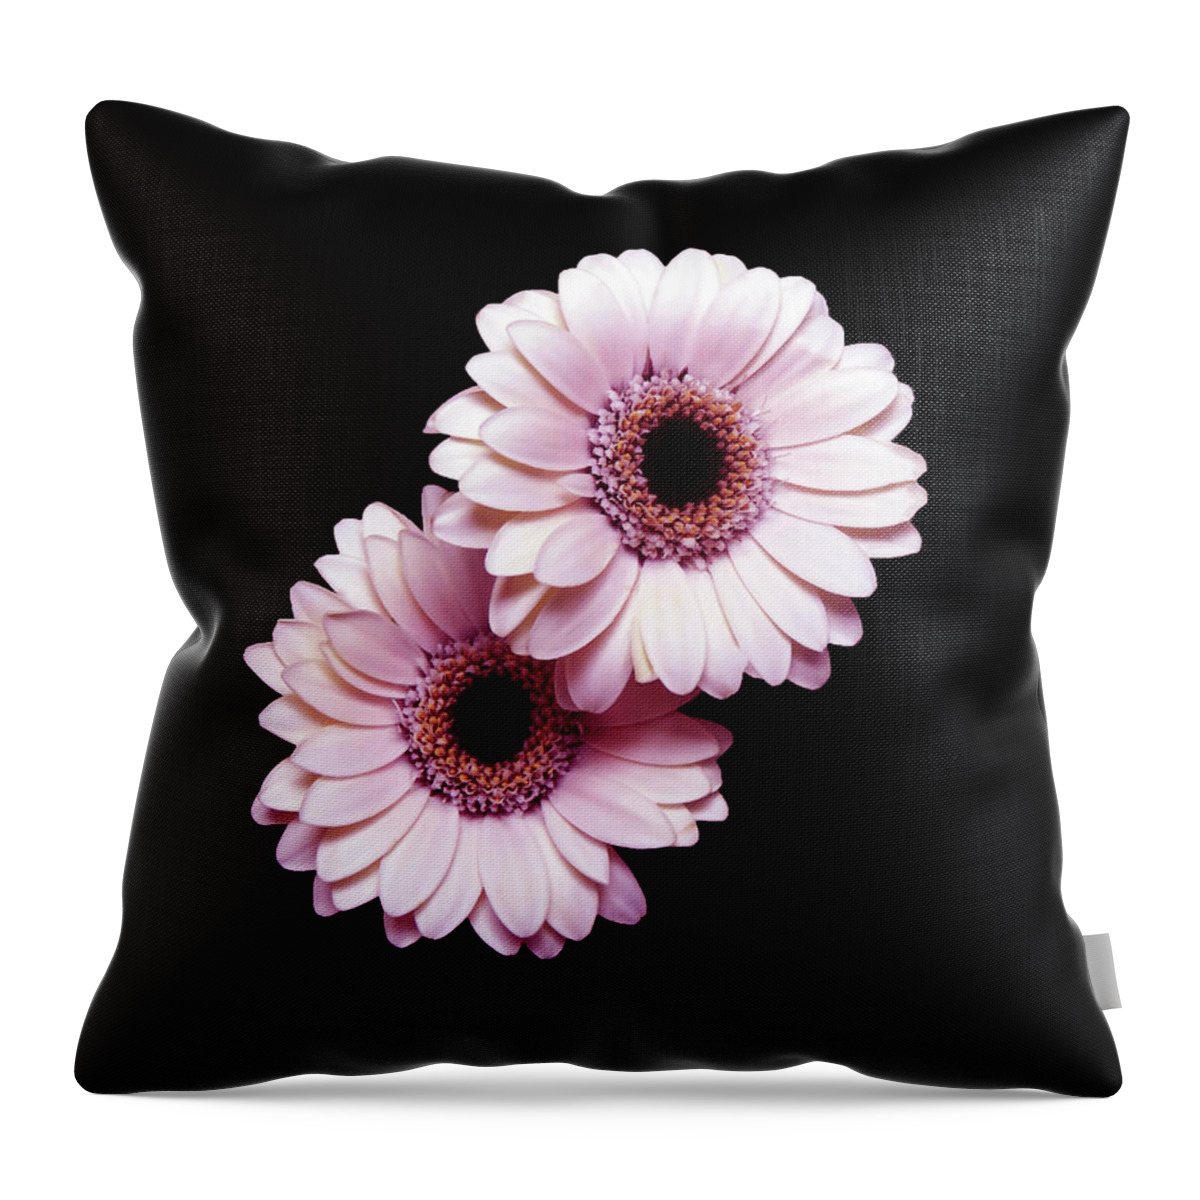 Flower Throw Pillow featuring the photograph Two Gerberas On Black by Johanna Hurmerinta